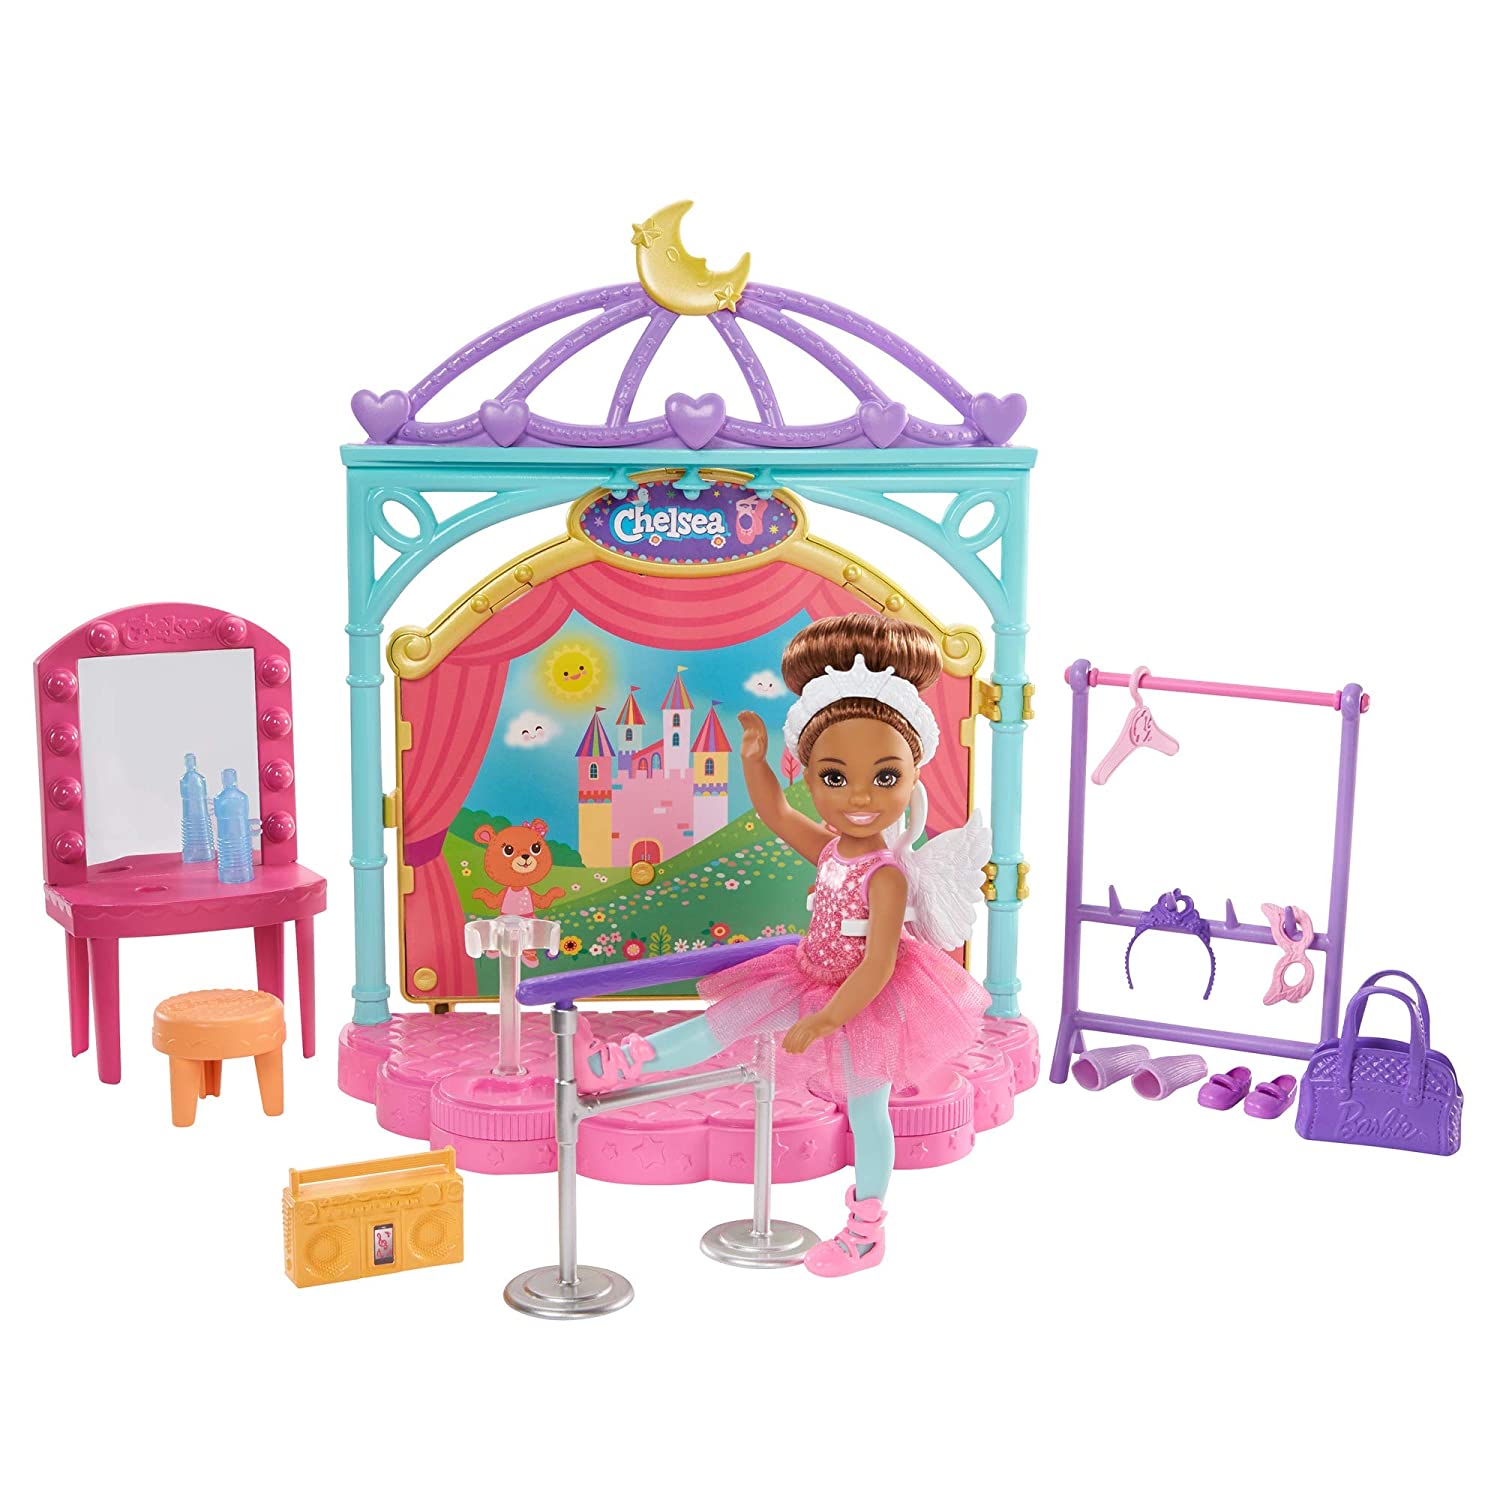 Barbie Club Chelsea Doll and Ballet Playset